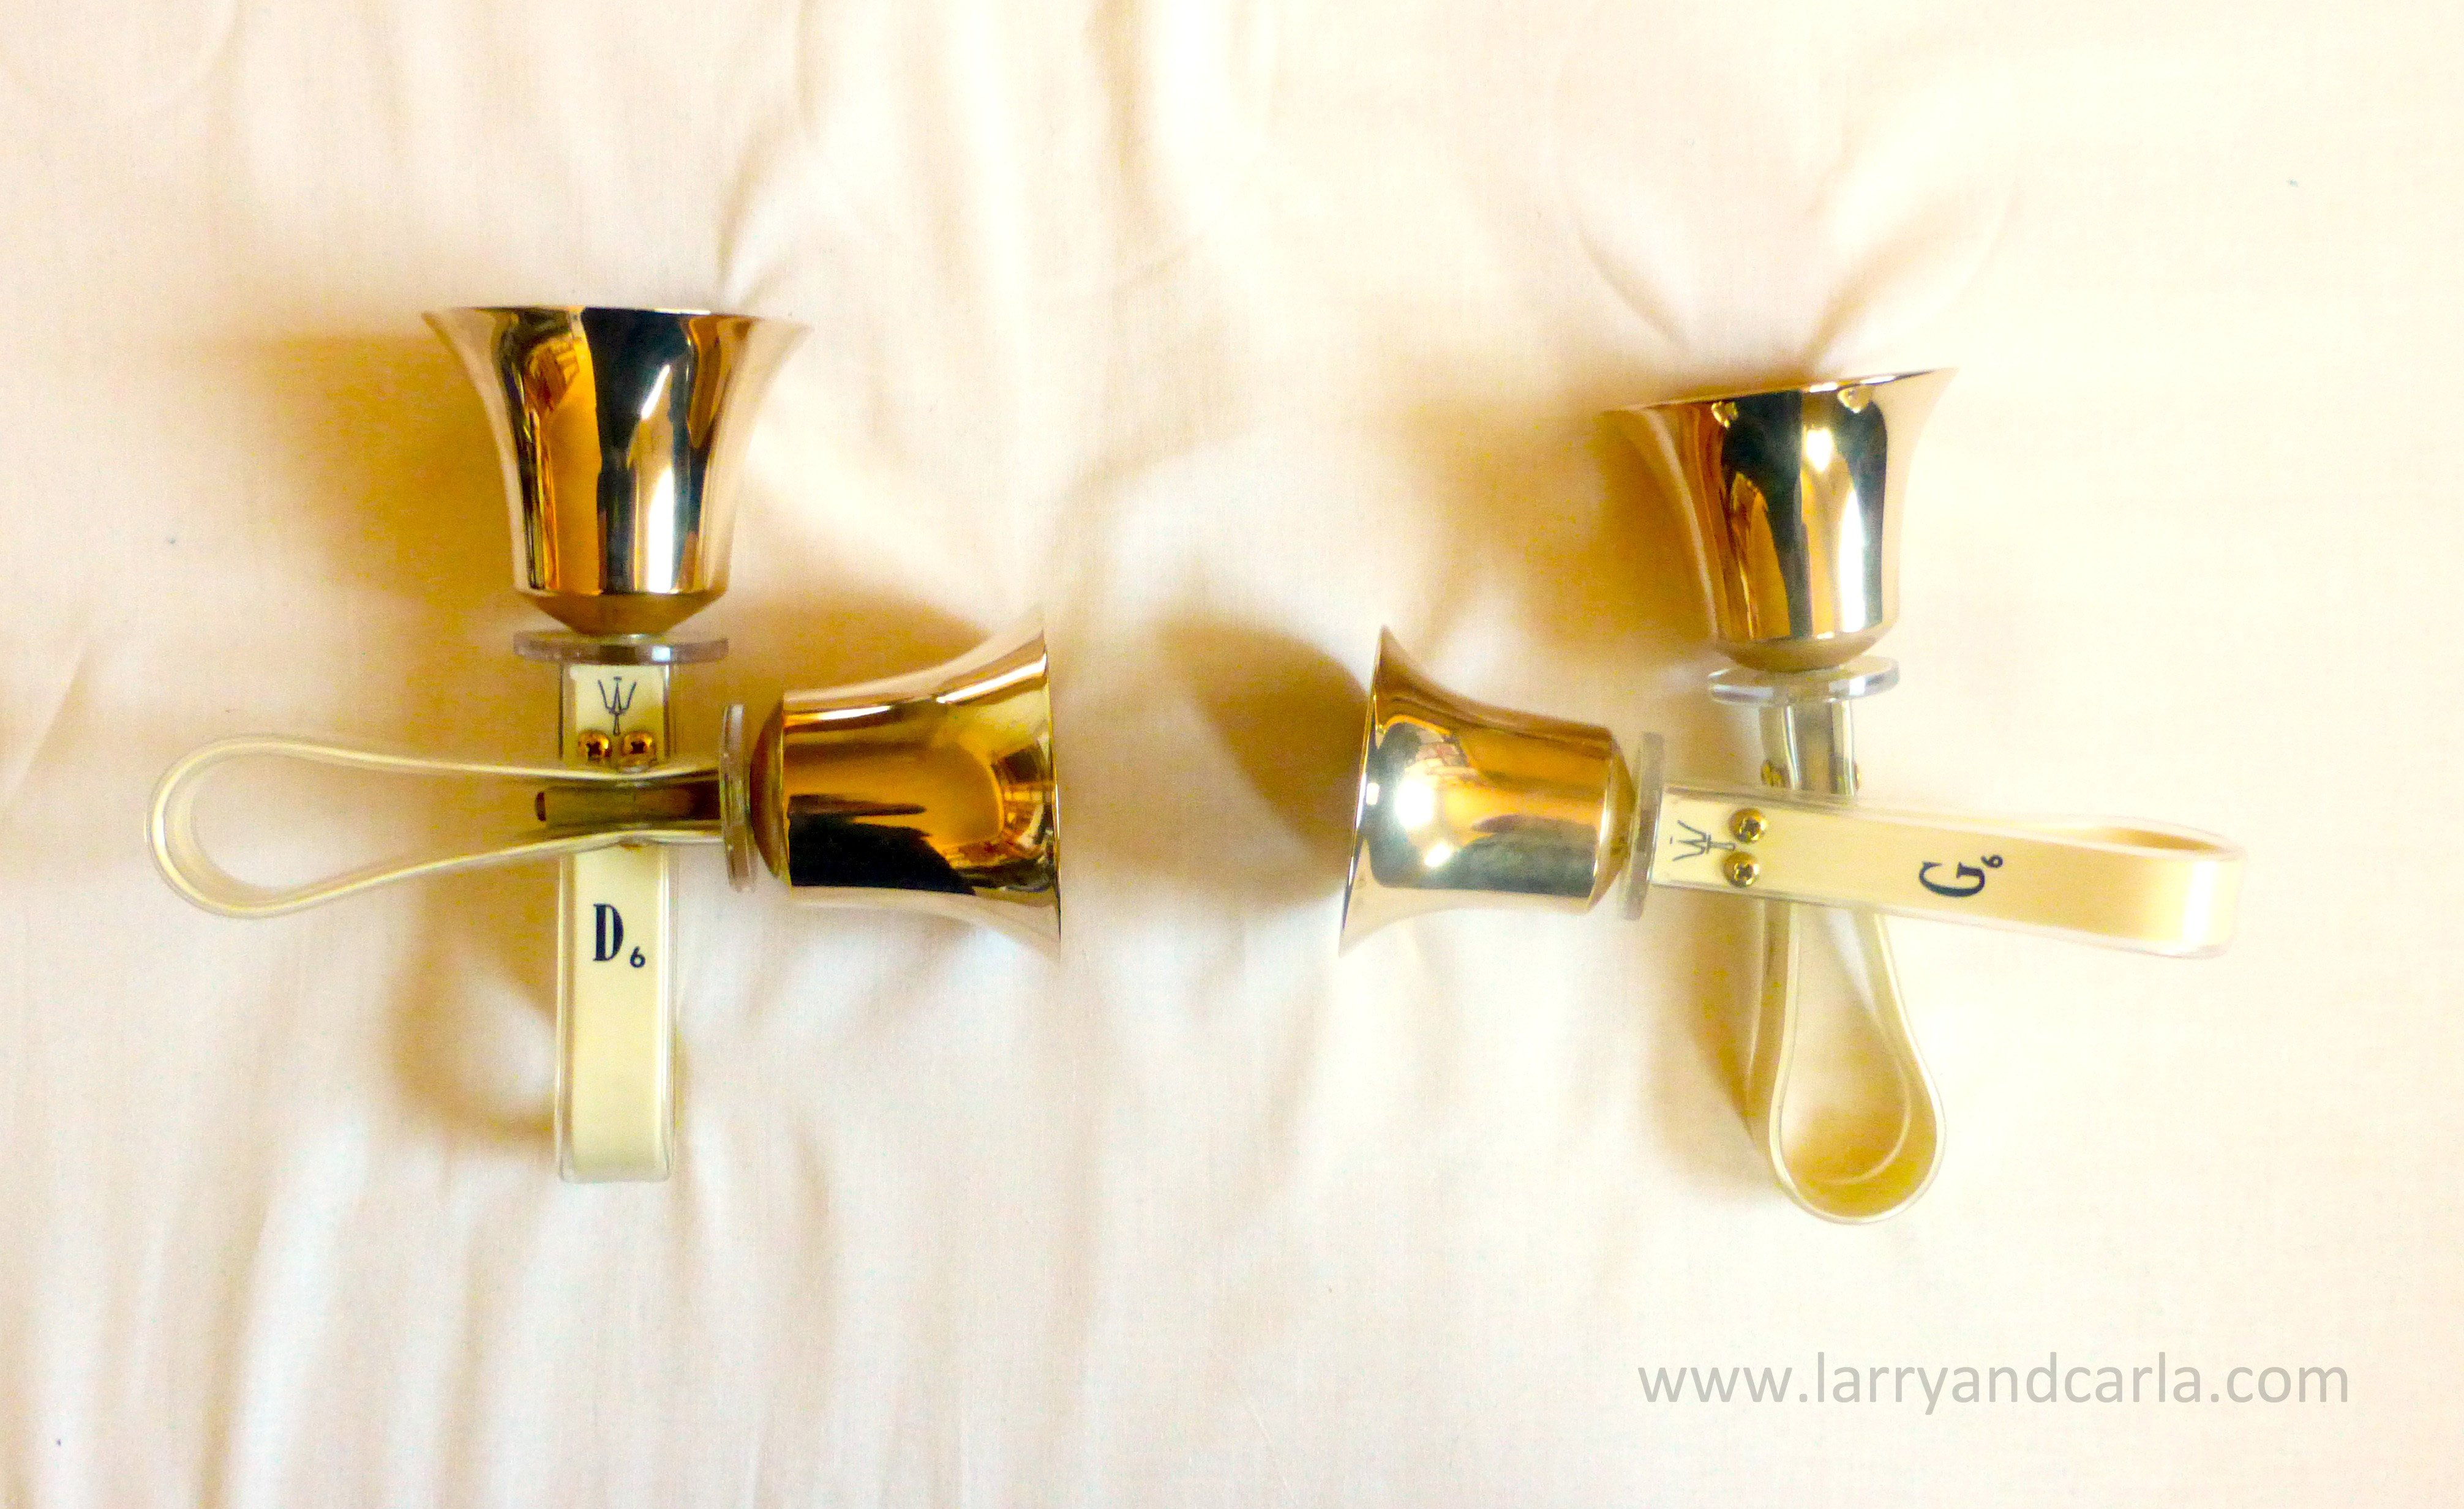 Playing Four-in-Hand Handbells in the British or Japanese 